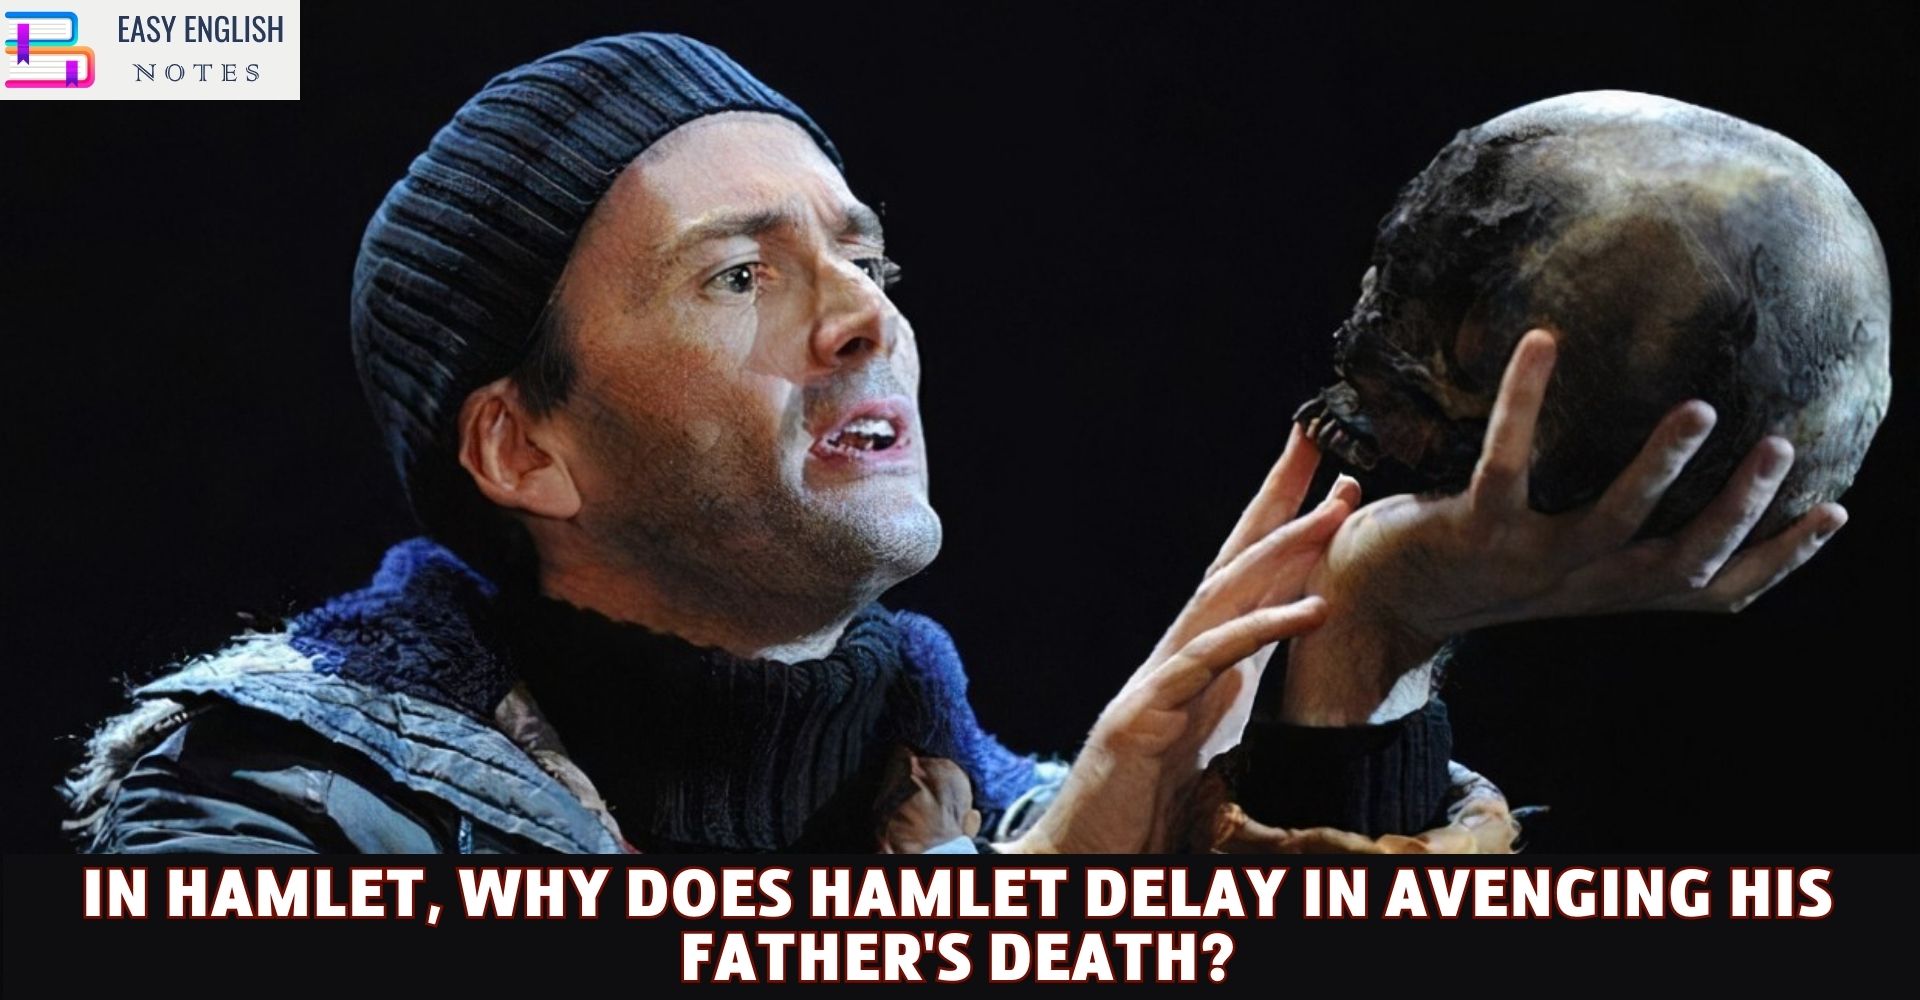 In Hamlet, why does Hamlet delay in avenging his father's death?